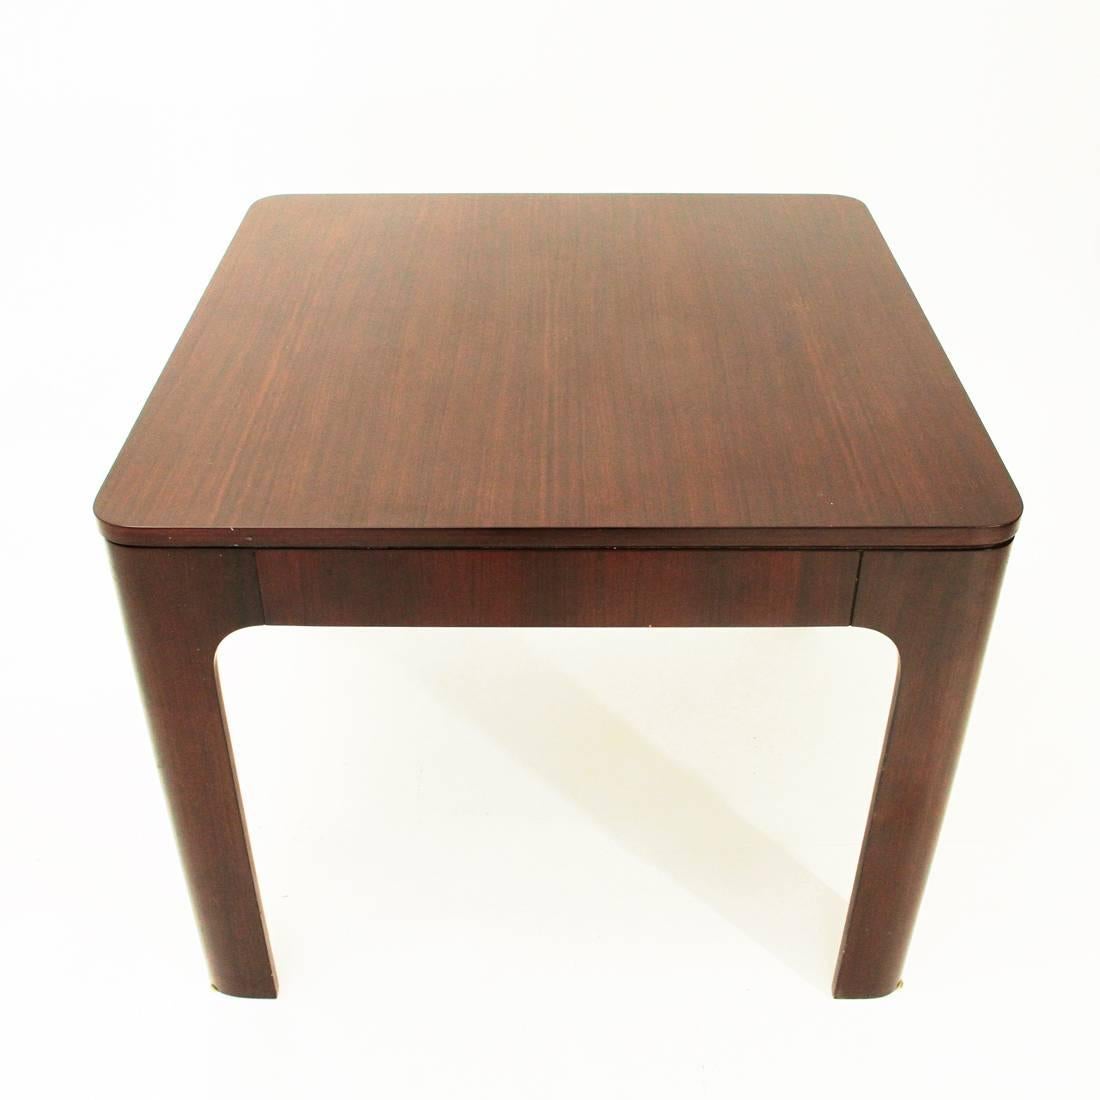 Mid-Century Modern Italian Rosewood Square Extendible Dining Table